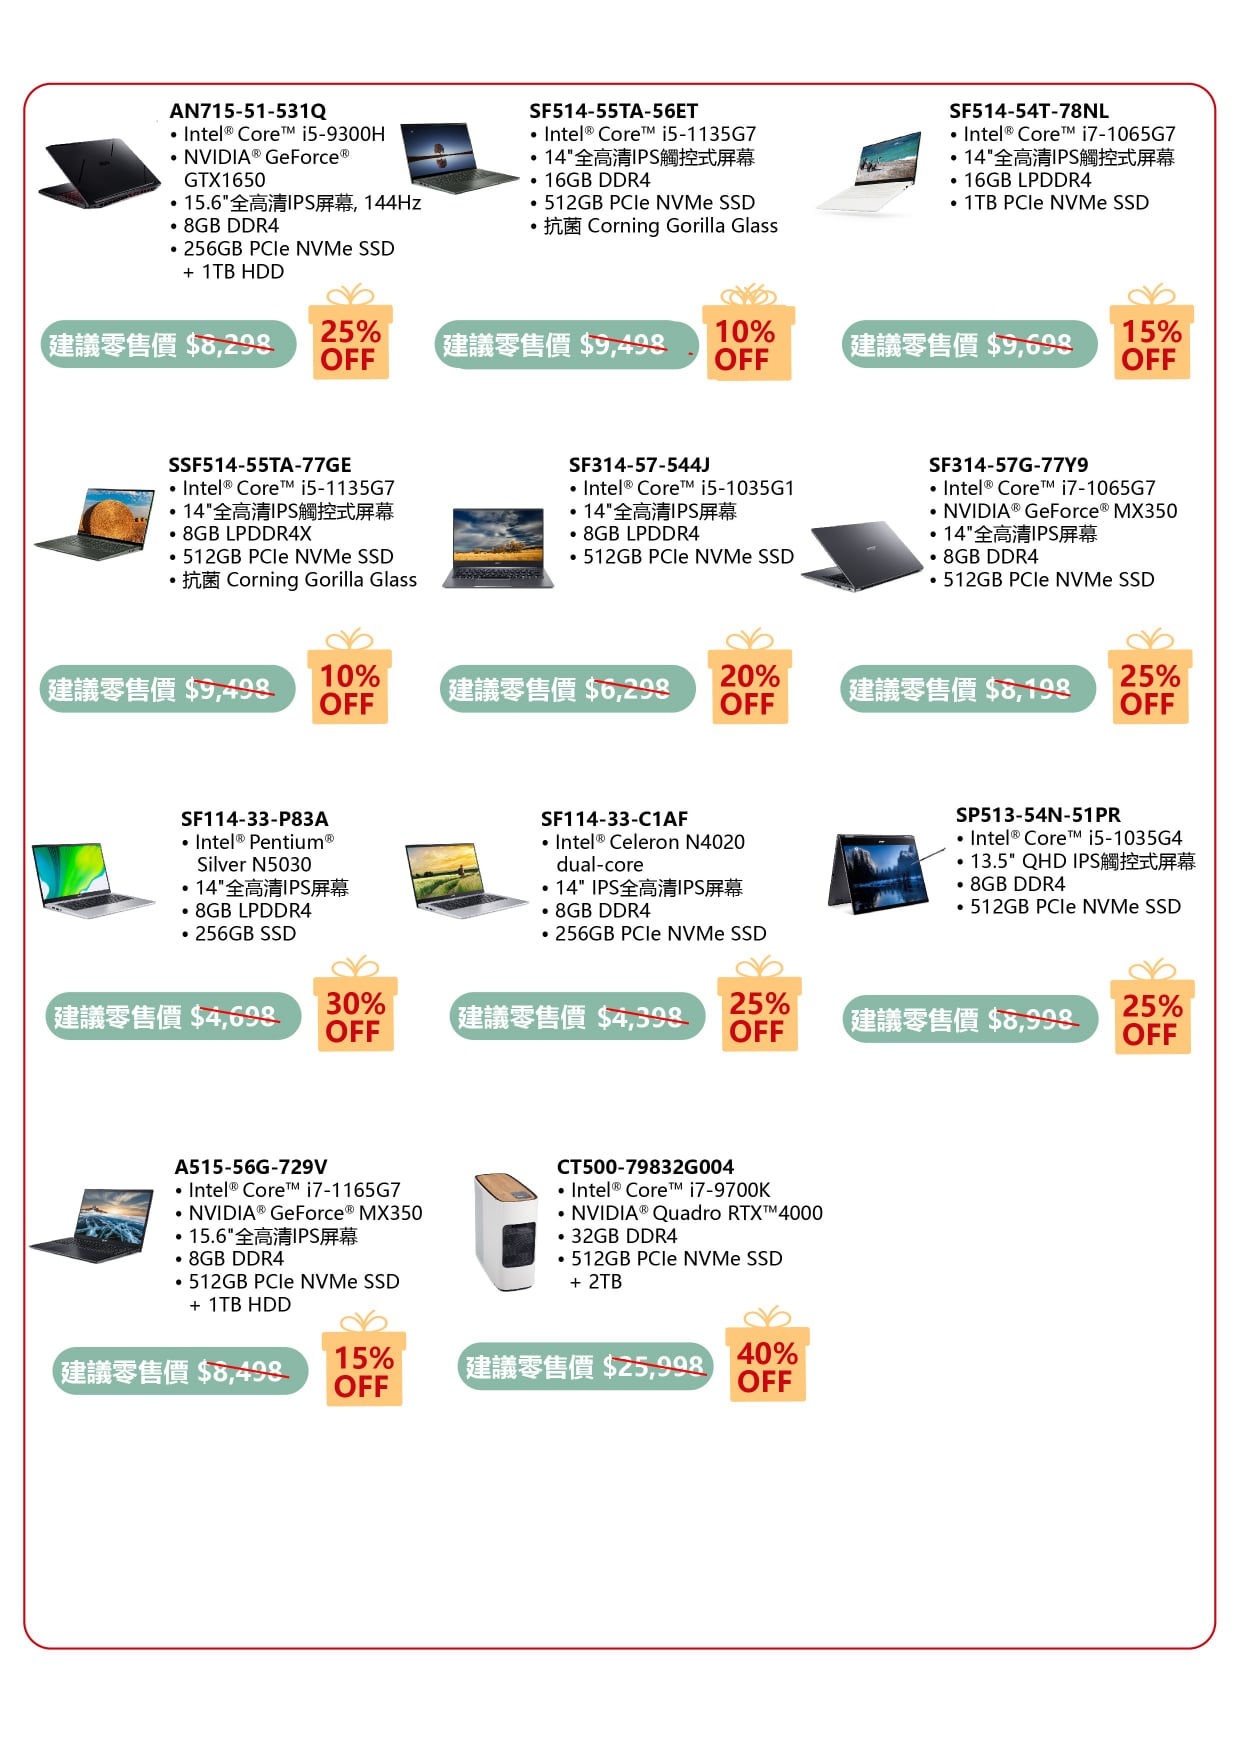 Acer Christmas Sales